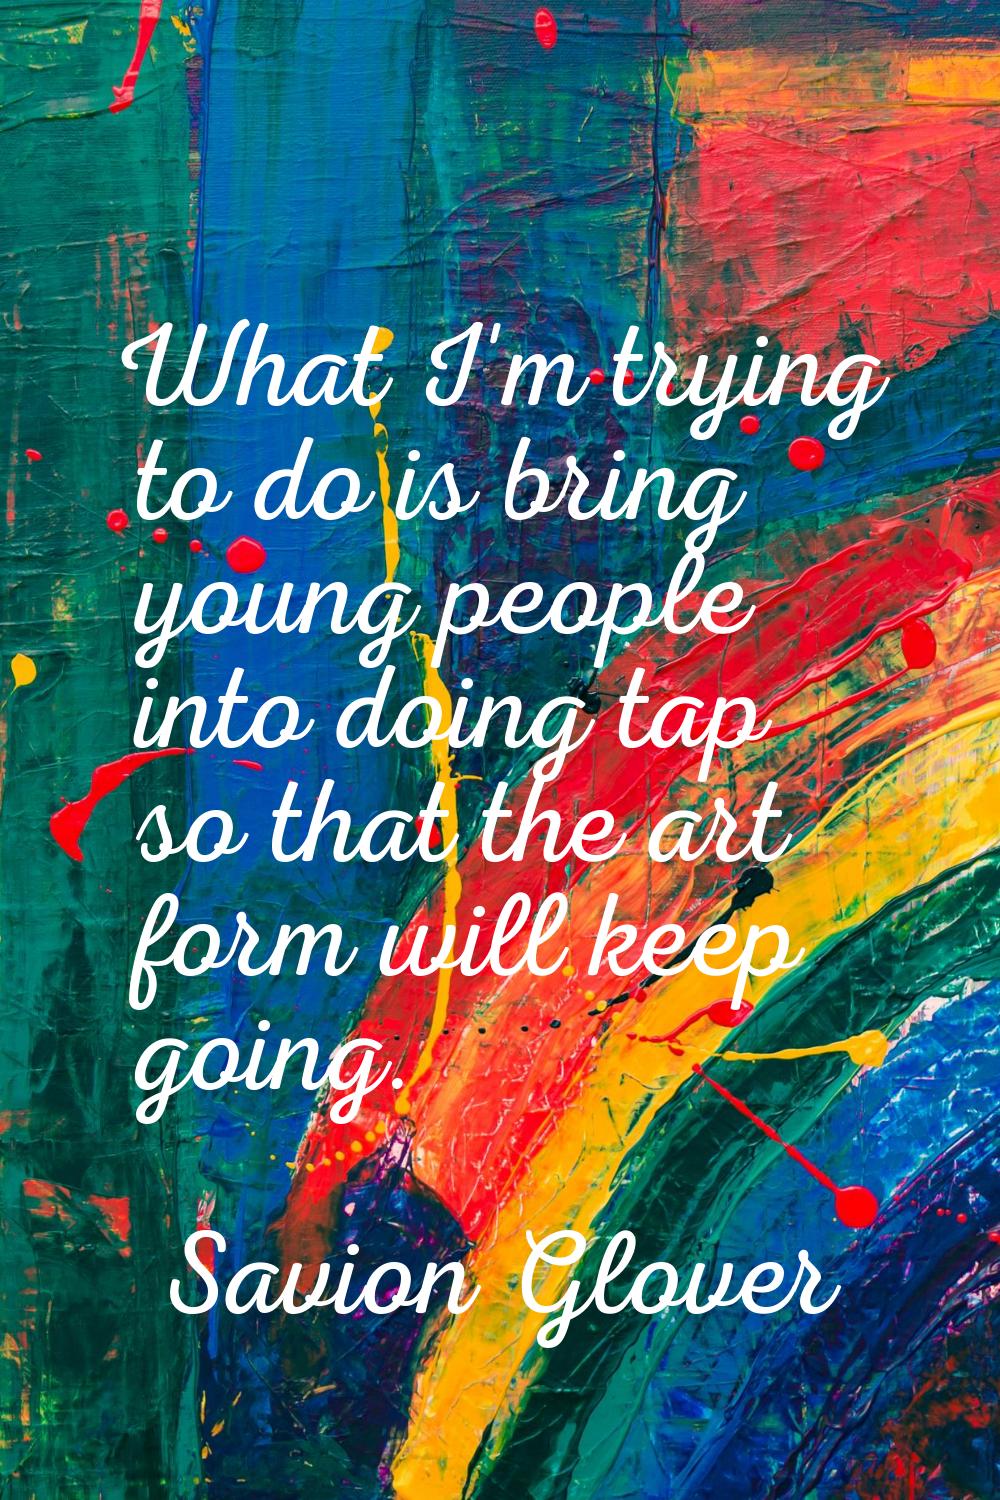 What I'm trying to do is bring young people into doing tap so that the art form will keep going.